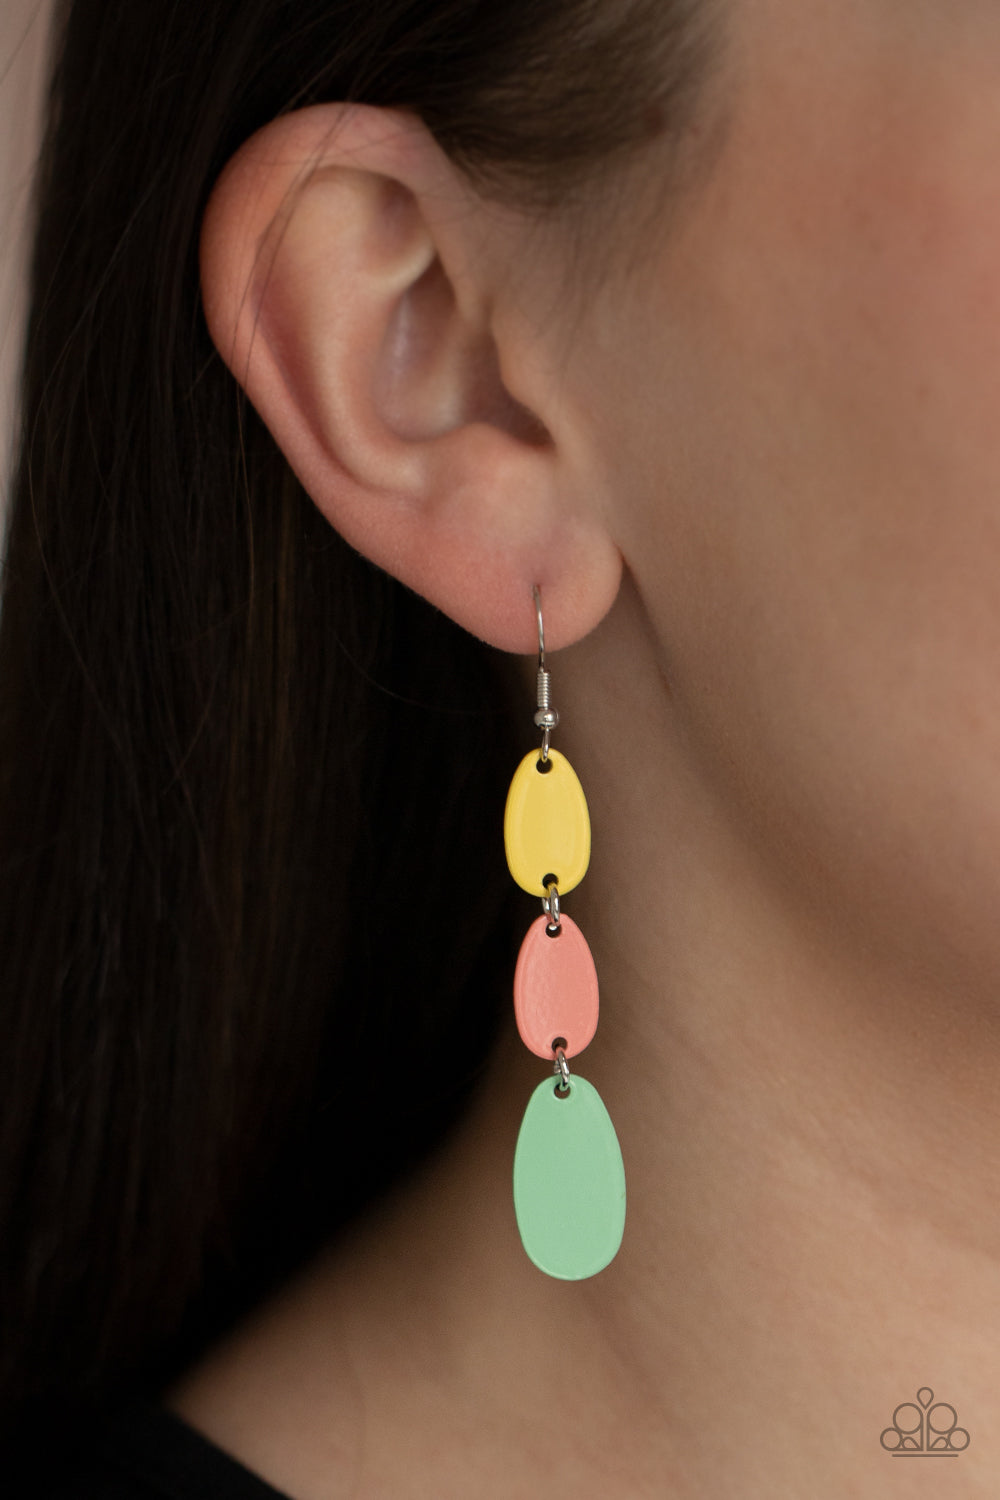 Paparazzi Jewelry & Accessories - Rainbow Drops - Multi Earrings. Bling By Titia Boutique